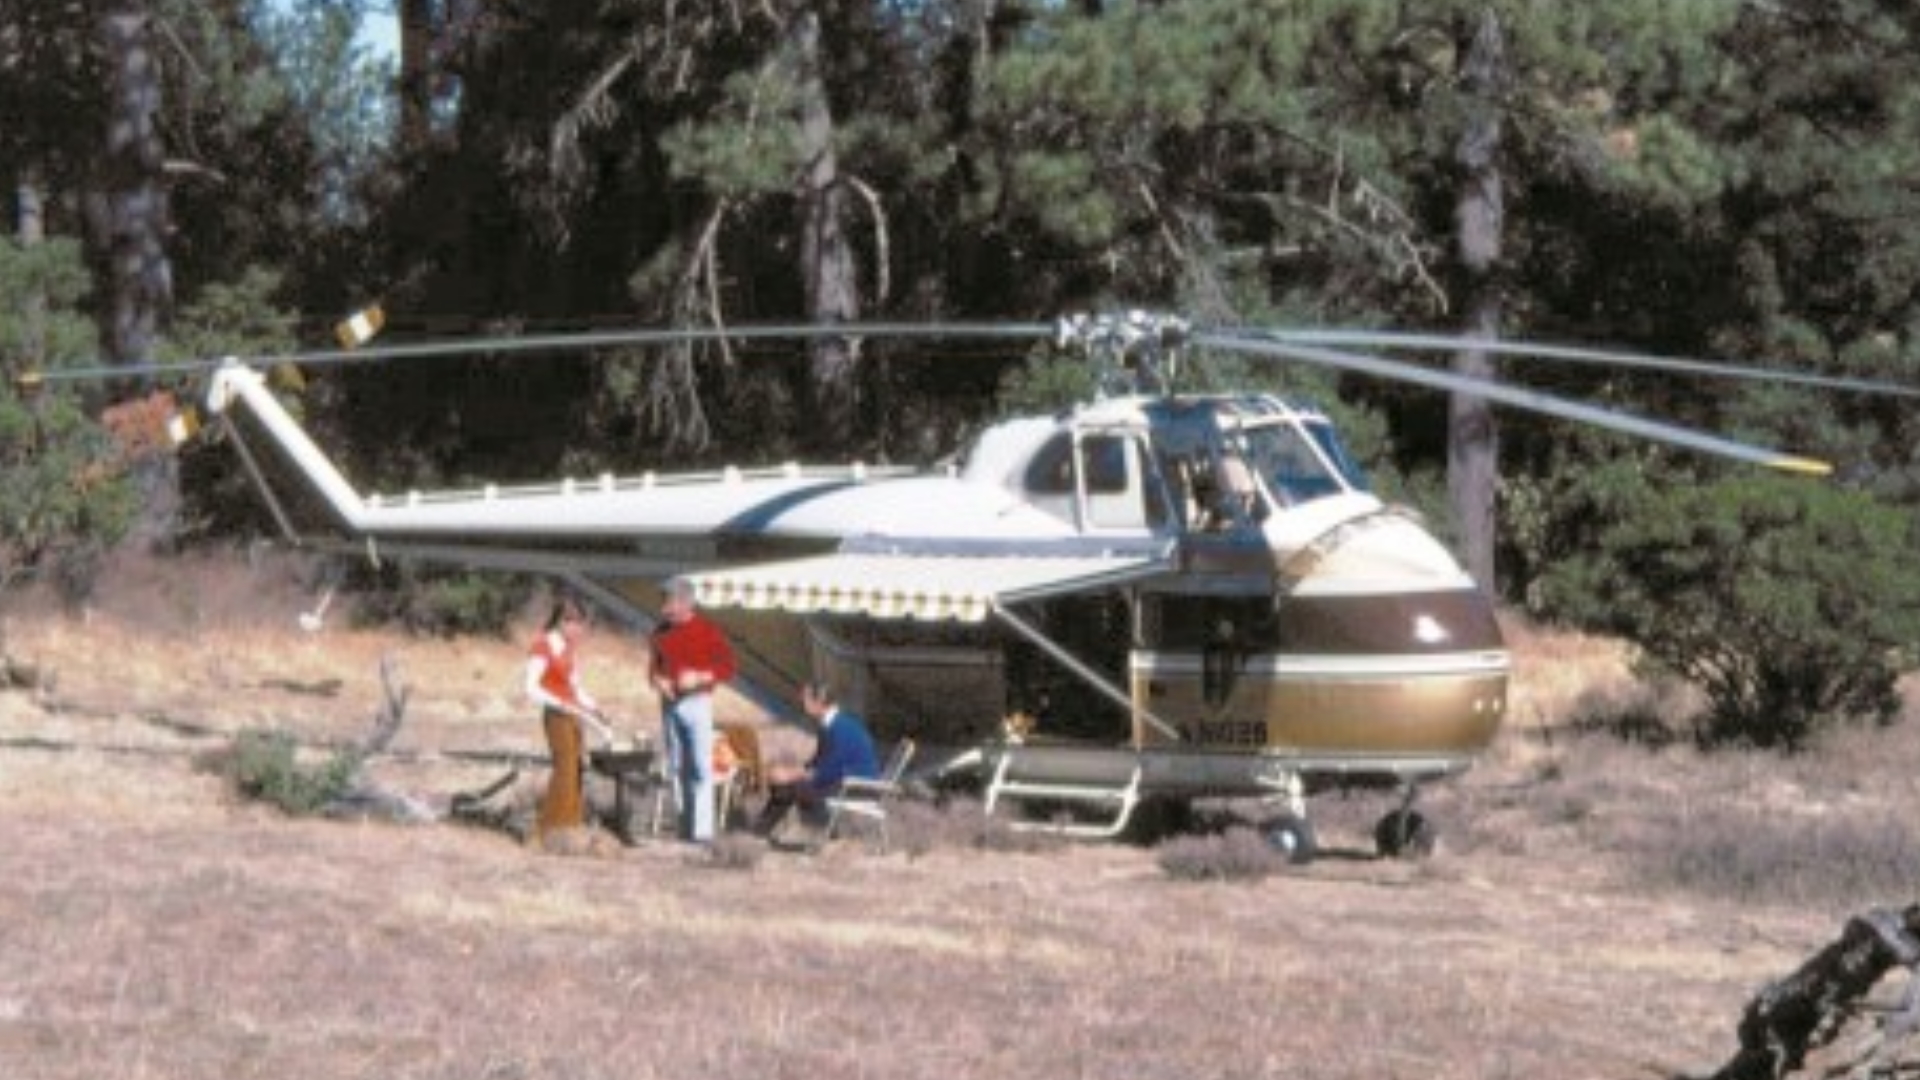 The Winnebago Heli-Home Was a Real Flying RV That Needs to Make a Comeback